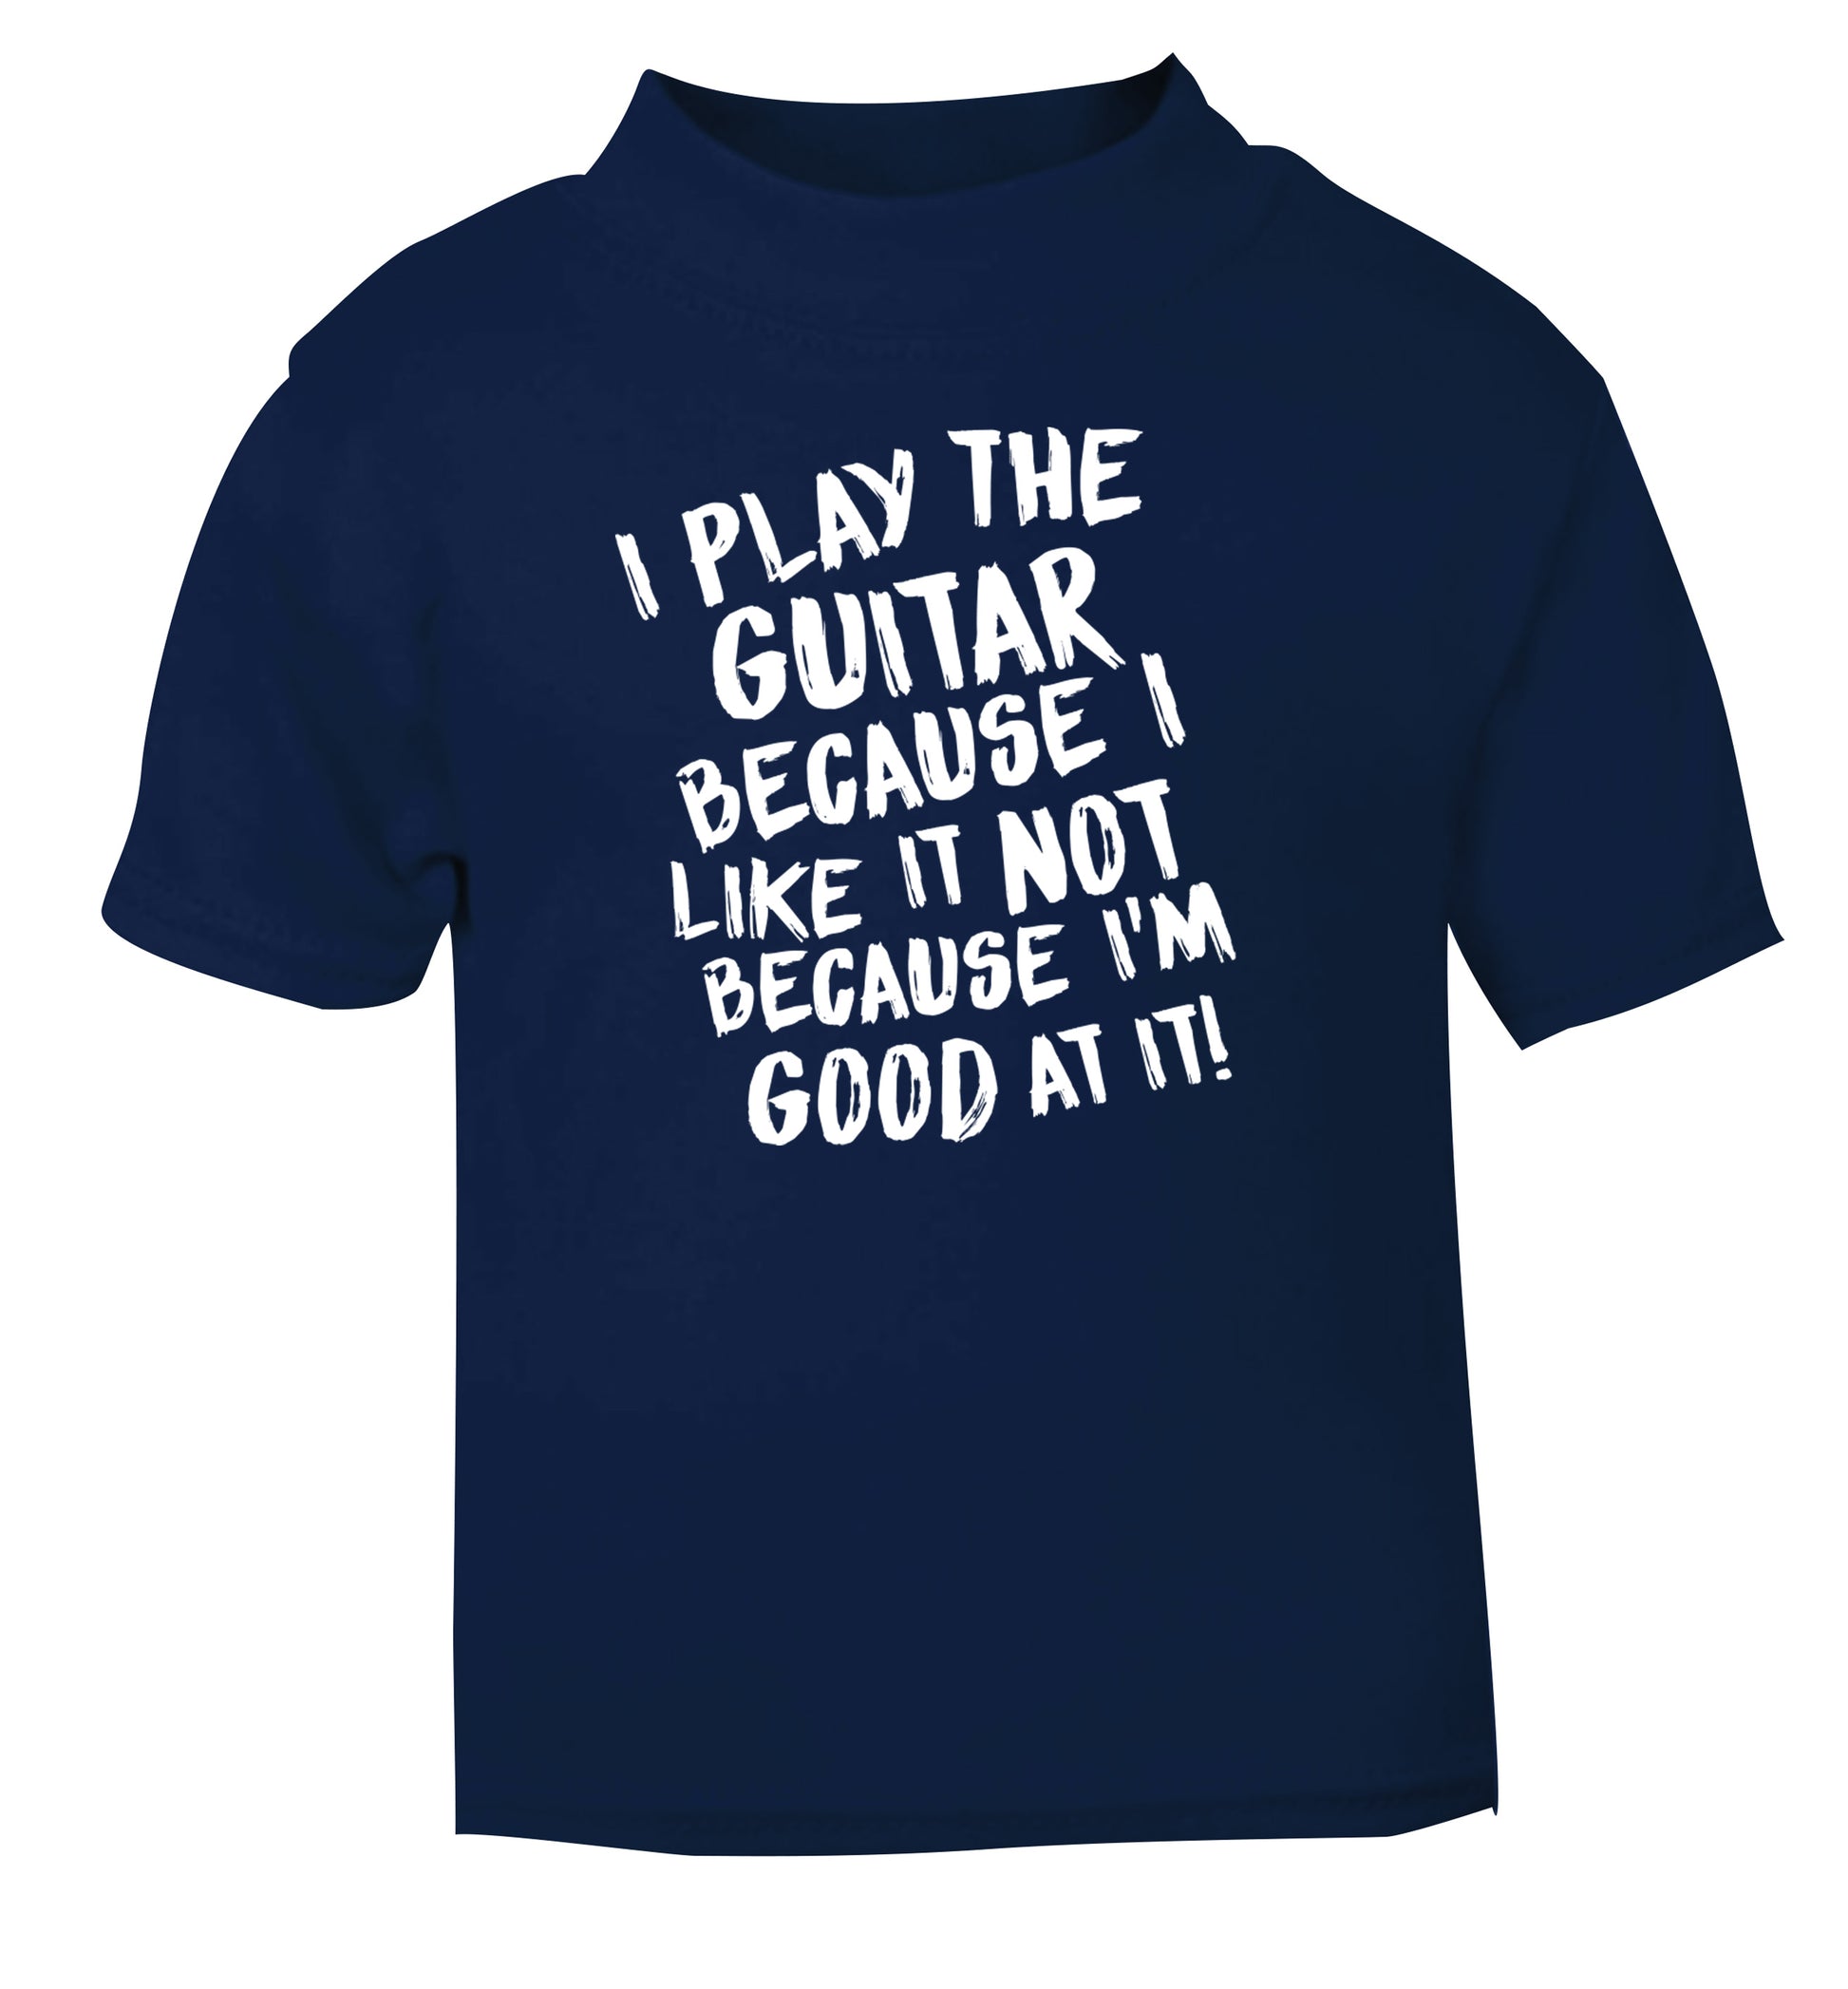 I play the guitar because I like it not because I'm good at it navy Baby Toddler Tshirt 2 Years